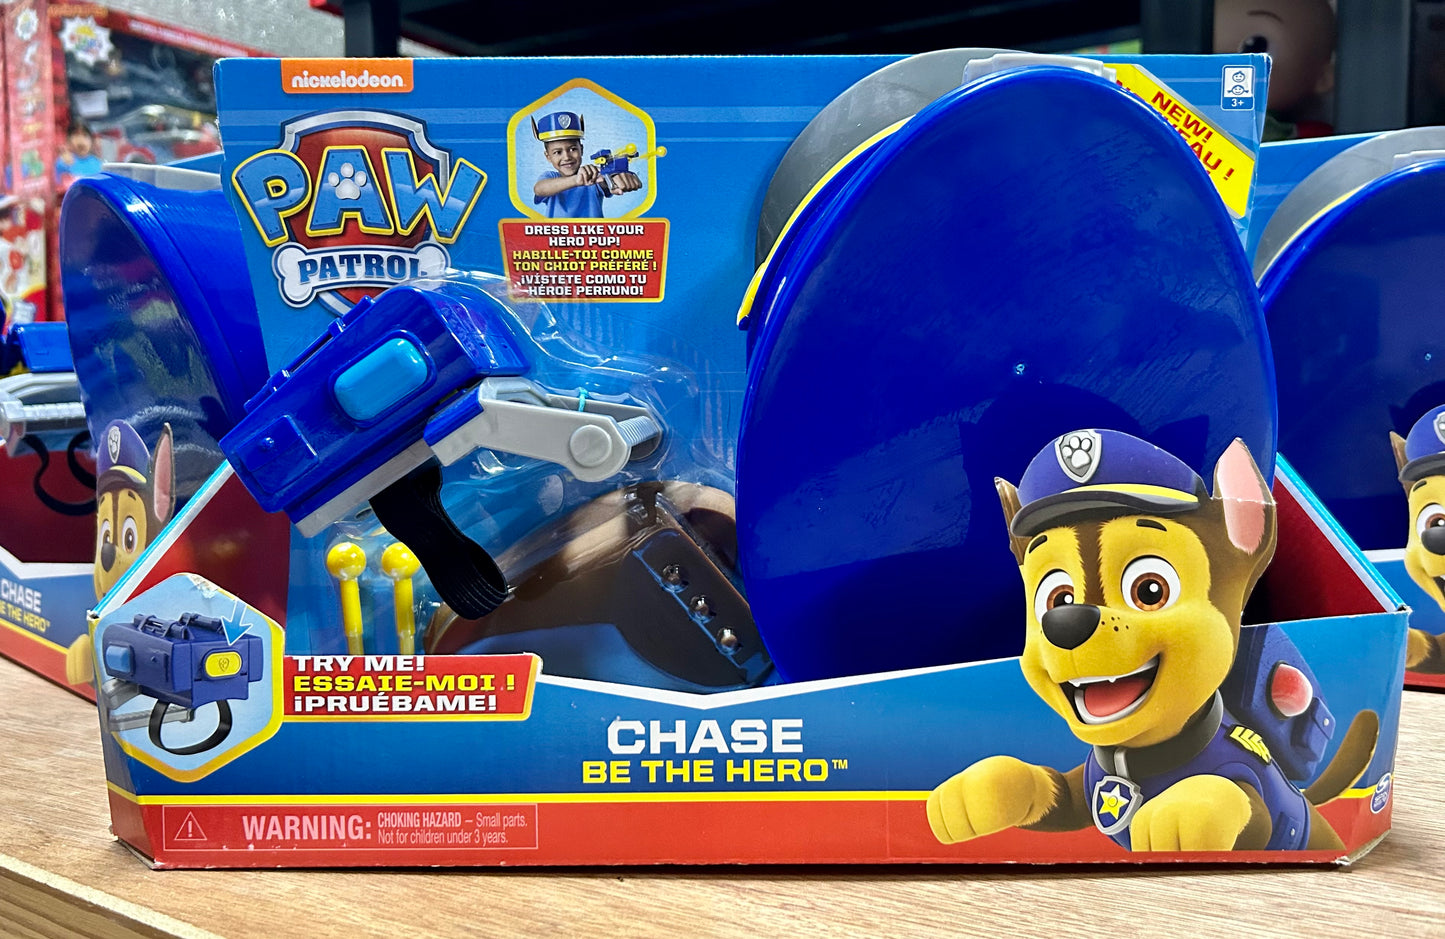 Paw Patrol Be The Hero Chase Role-Play Set 33017